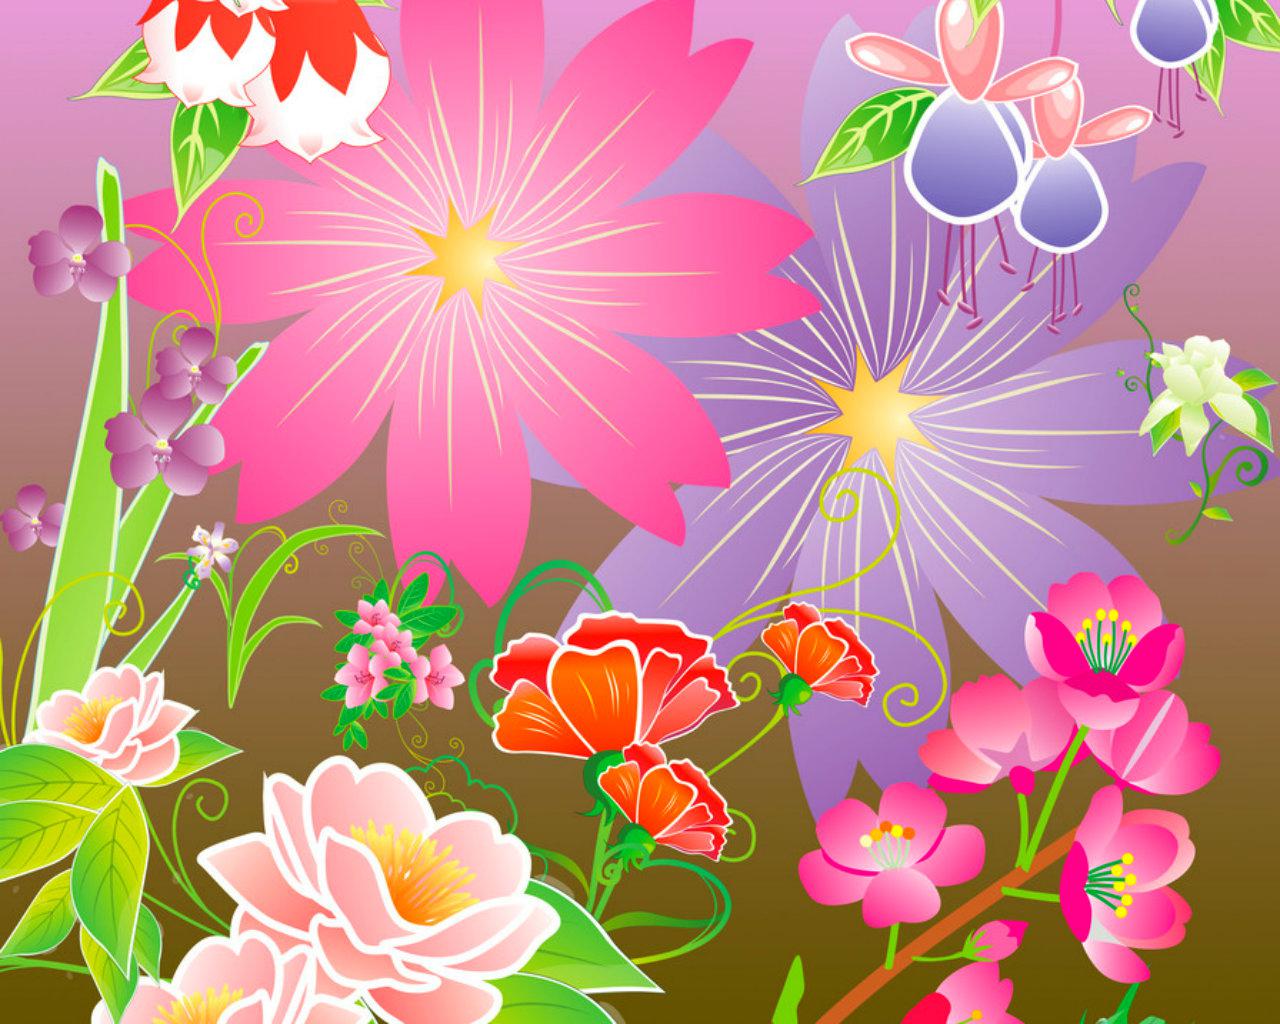 Bright colors flowers - (#119527) - High Quality and Resolution ...